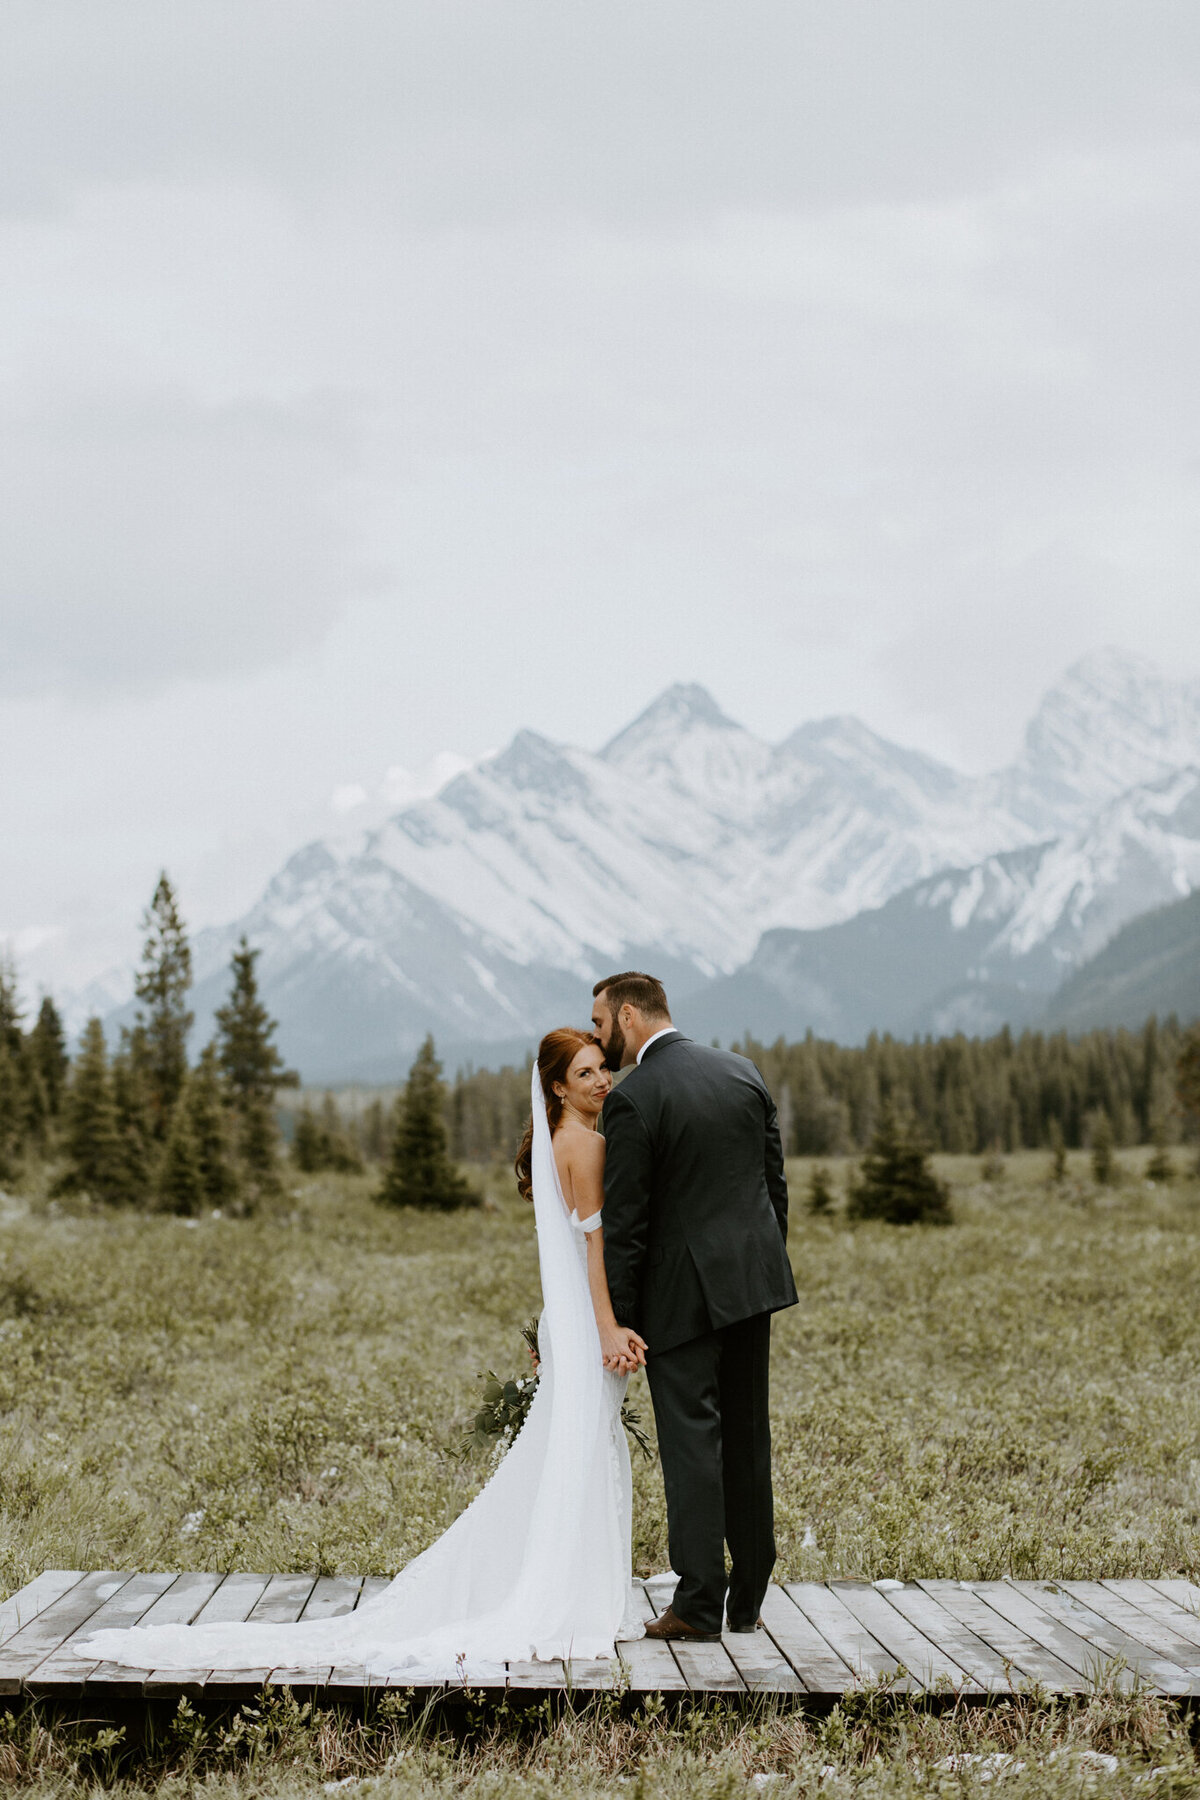 Elegant bride and groom portrait captured by Tim & Court Photo and Film, joyful and adventurous wedding photographer and videographer in Calgary, Alberta. Featured on the Bronte Bride Vendor Guide.